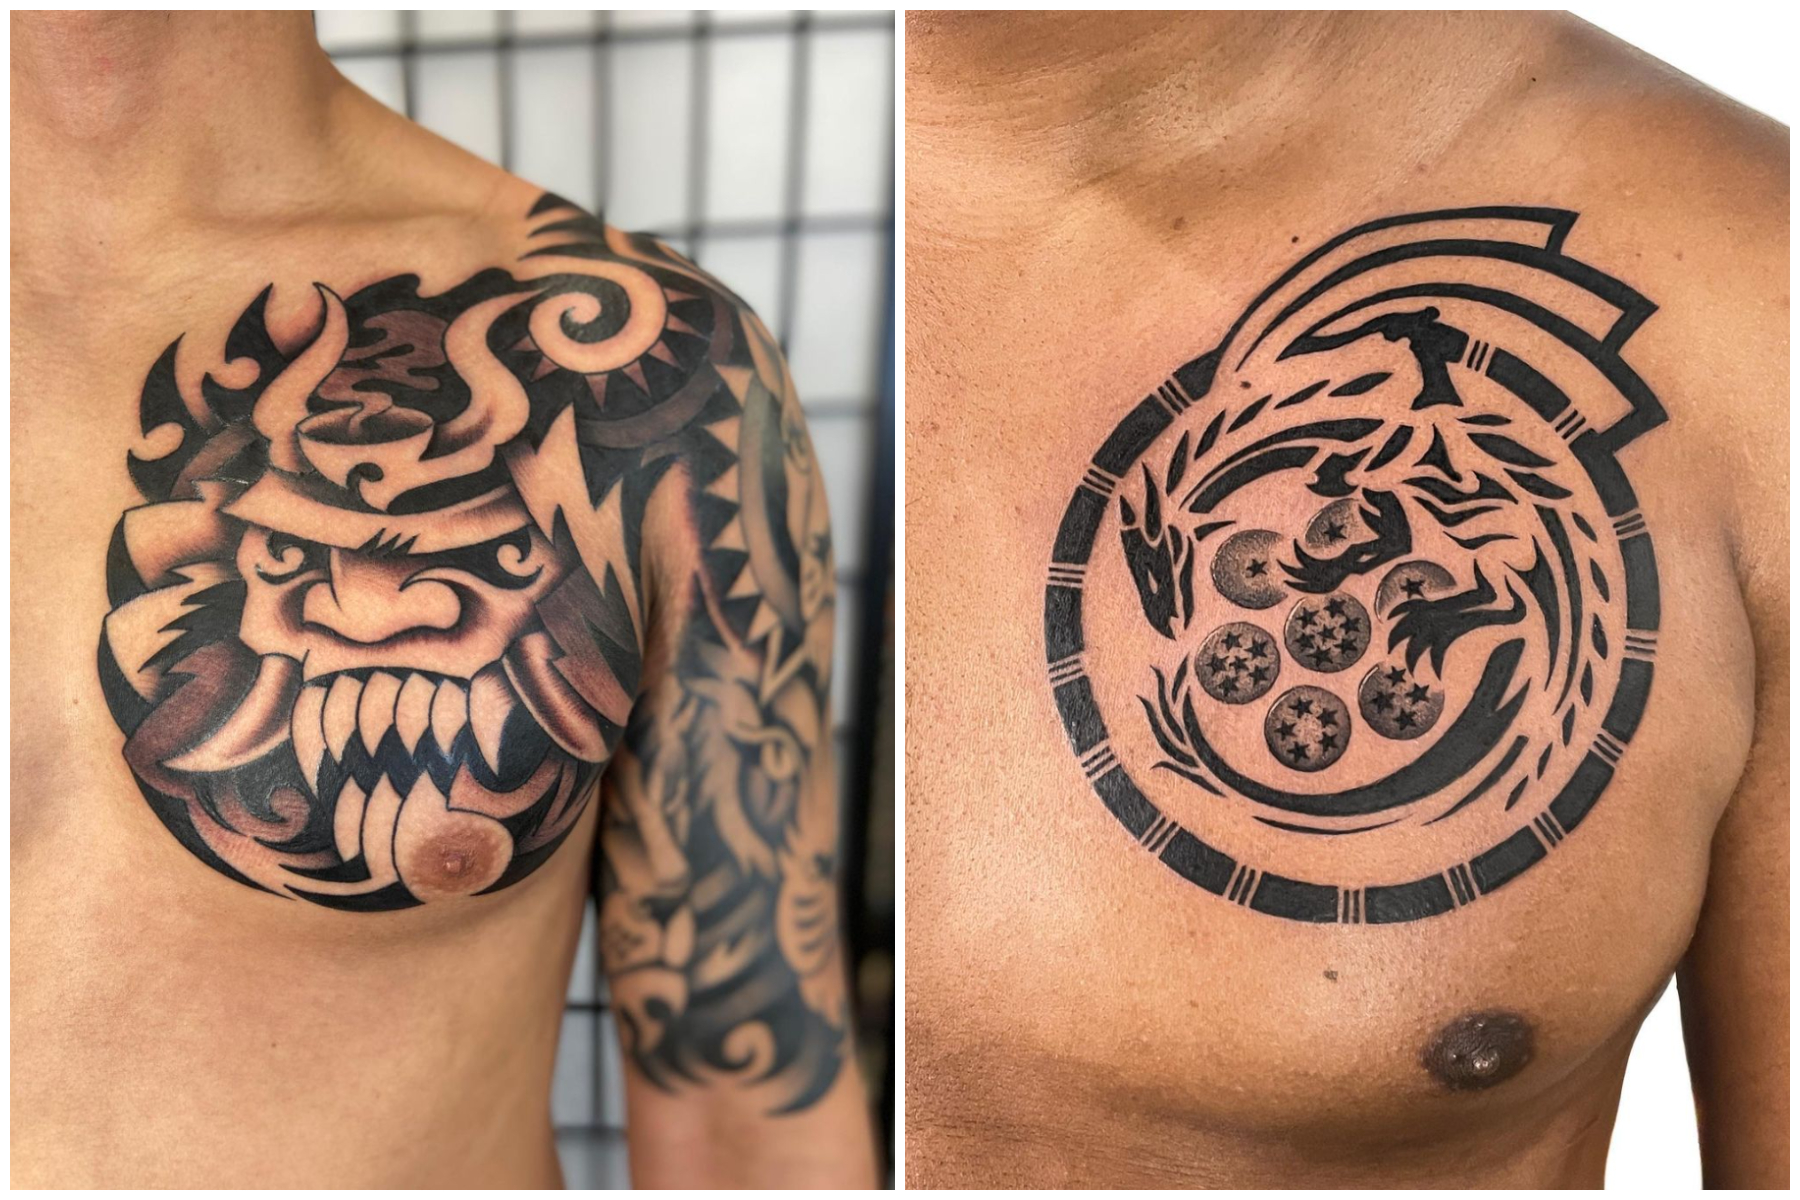 TATTOO FOR THE CHEST | 25 IDEAS MEN SHOULDN'T MISS